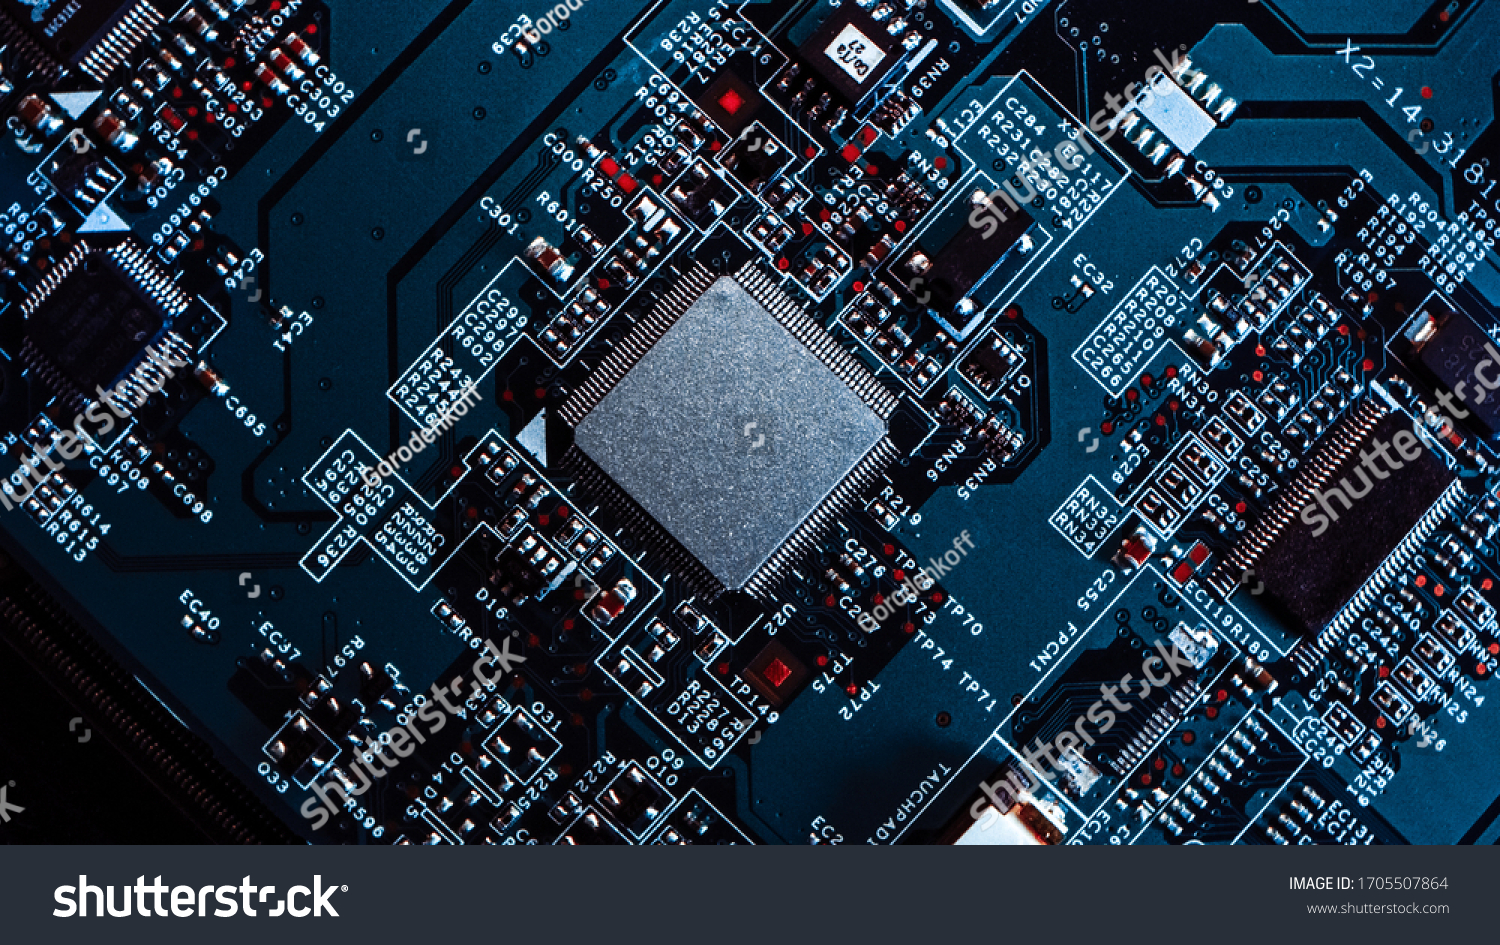 Macro Close-up Shot of Microchip, CPU Processor on Black Printed Circuit Board, Computer Motherboard with Components Inside of Electronic Device, Part of Supercomputer. #1705507864